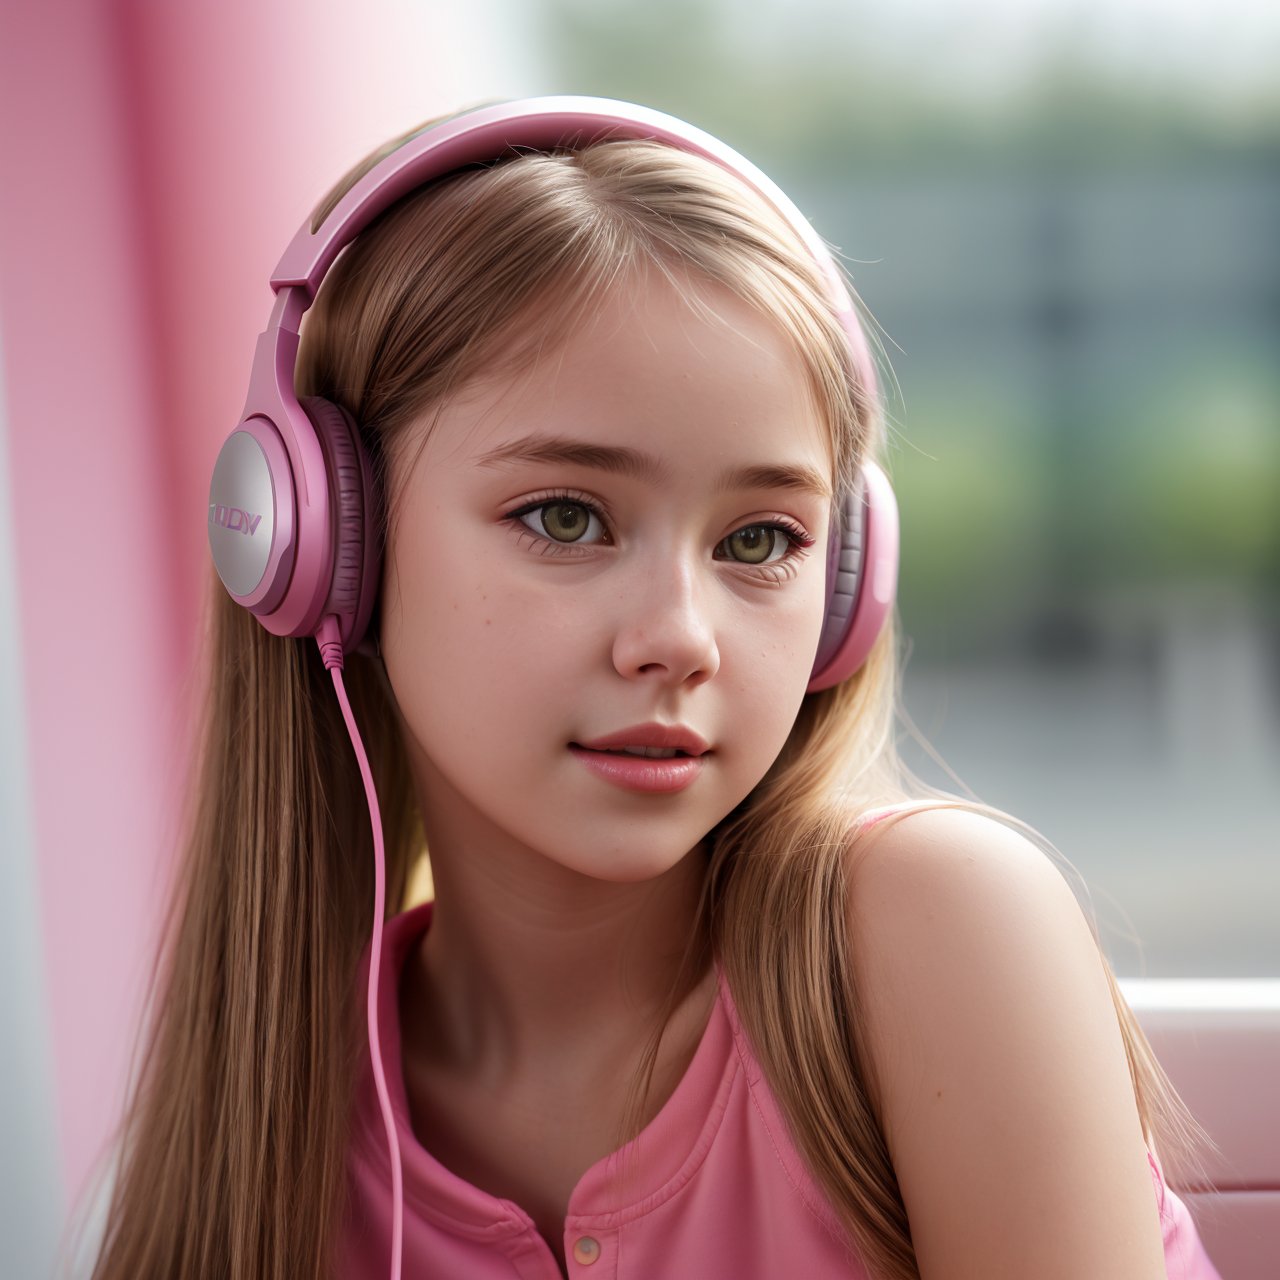 SFW, best quality, dolly short, close up of beautiful (AIDA_LoRA_HanF:1.28) <lora:AIDA_LoRA_HanF:0.76> in a pink shirt and with a pink (headphones:1.1) on her head sitting on the gray futuristic surface, young teen girl, open mouth, dramatic, hyper realistic, studio photo, kkw-ph1, hdr, f1.6